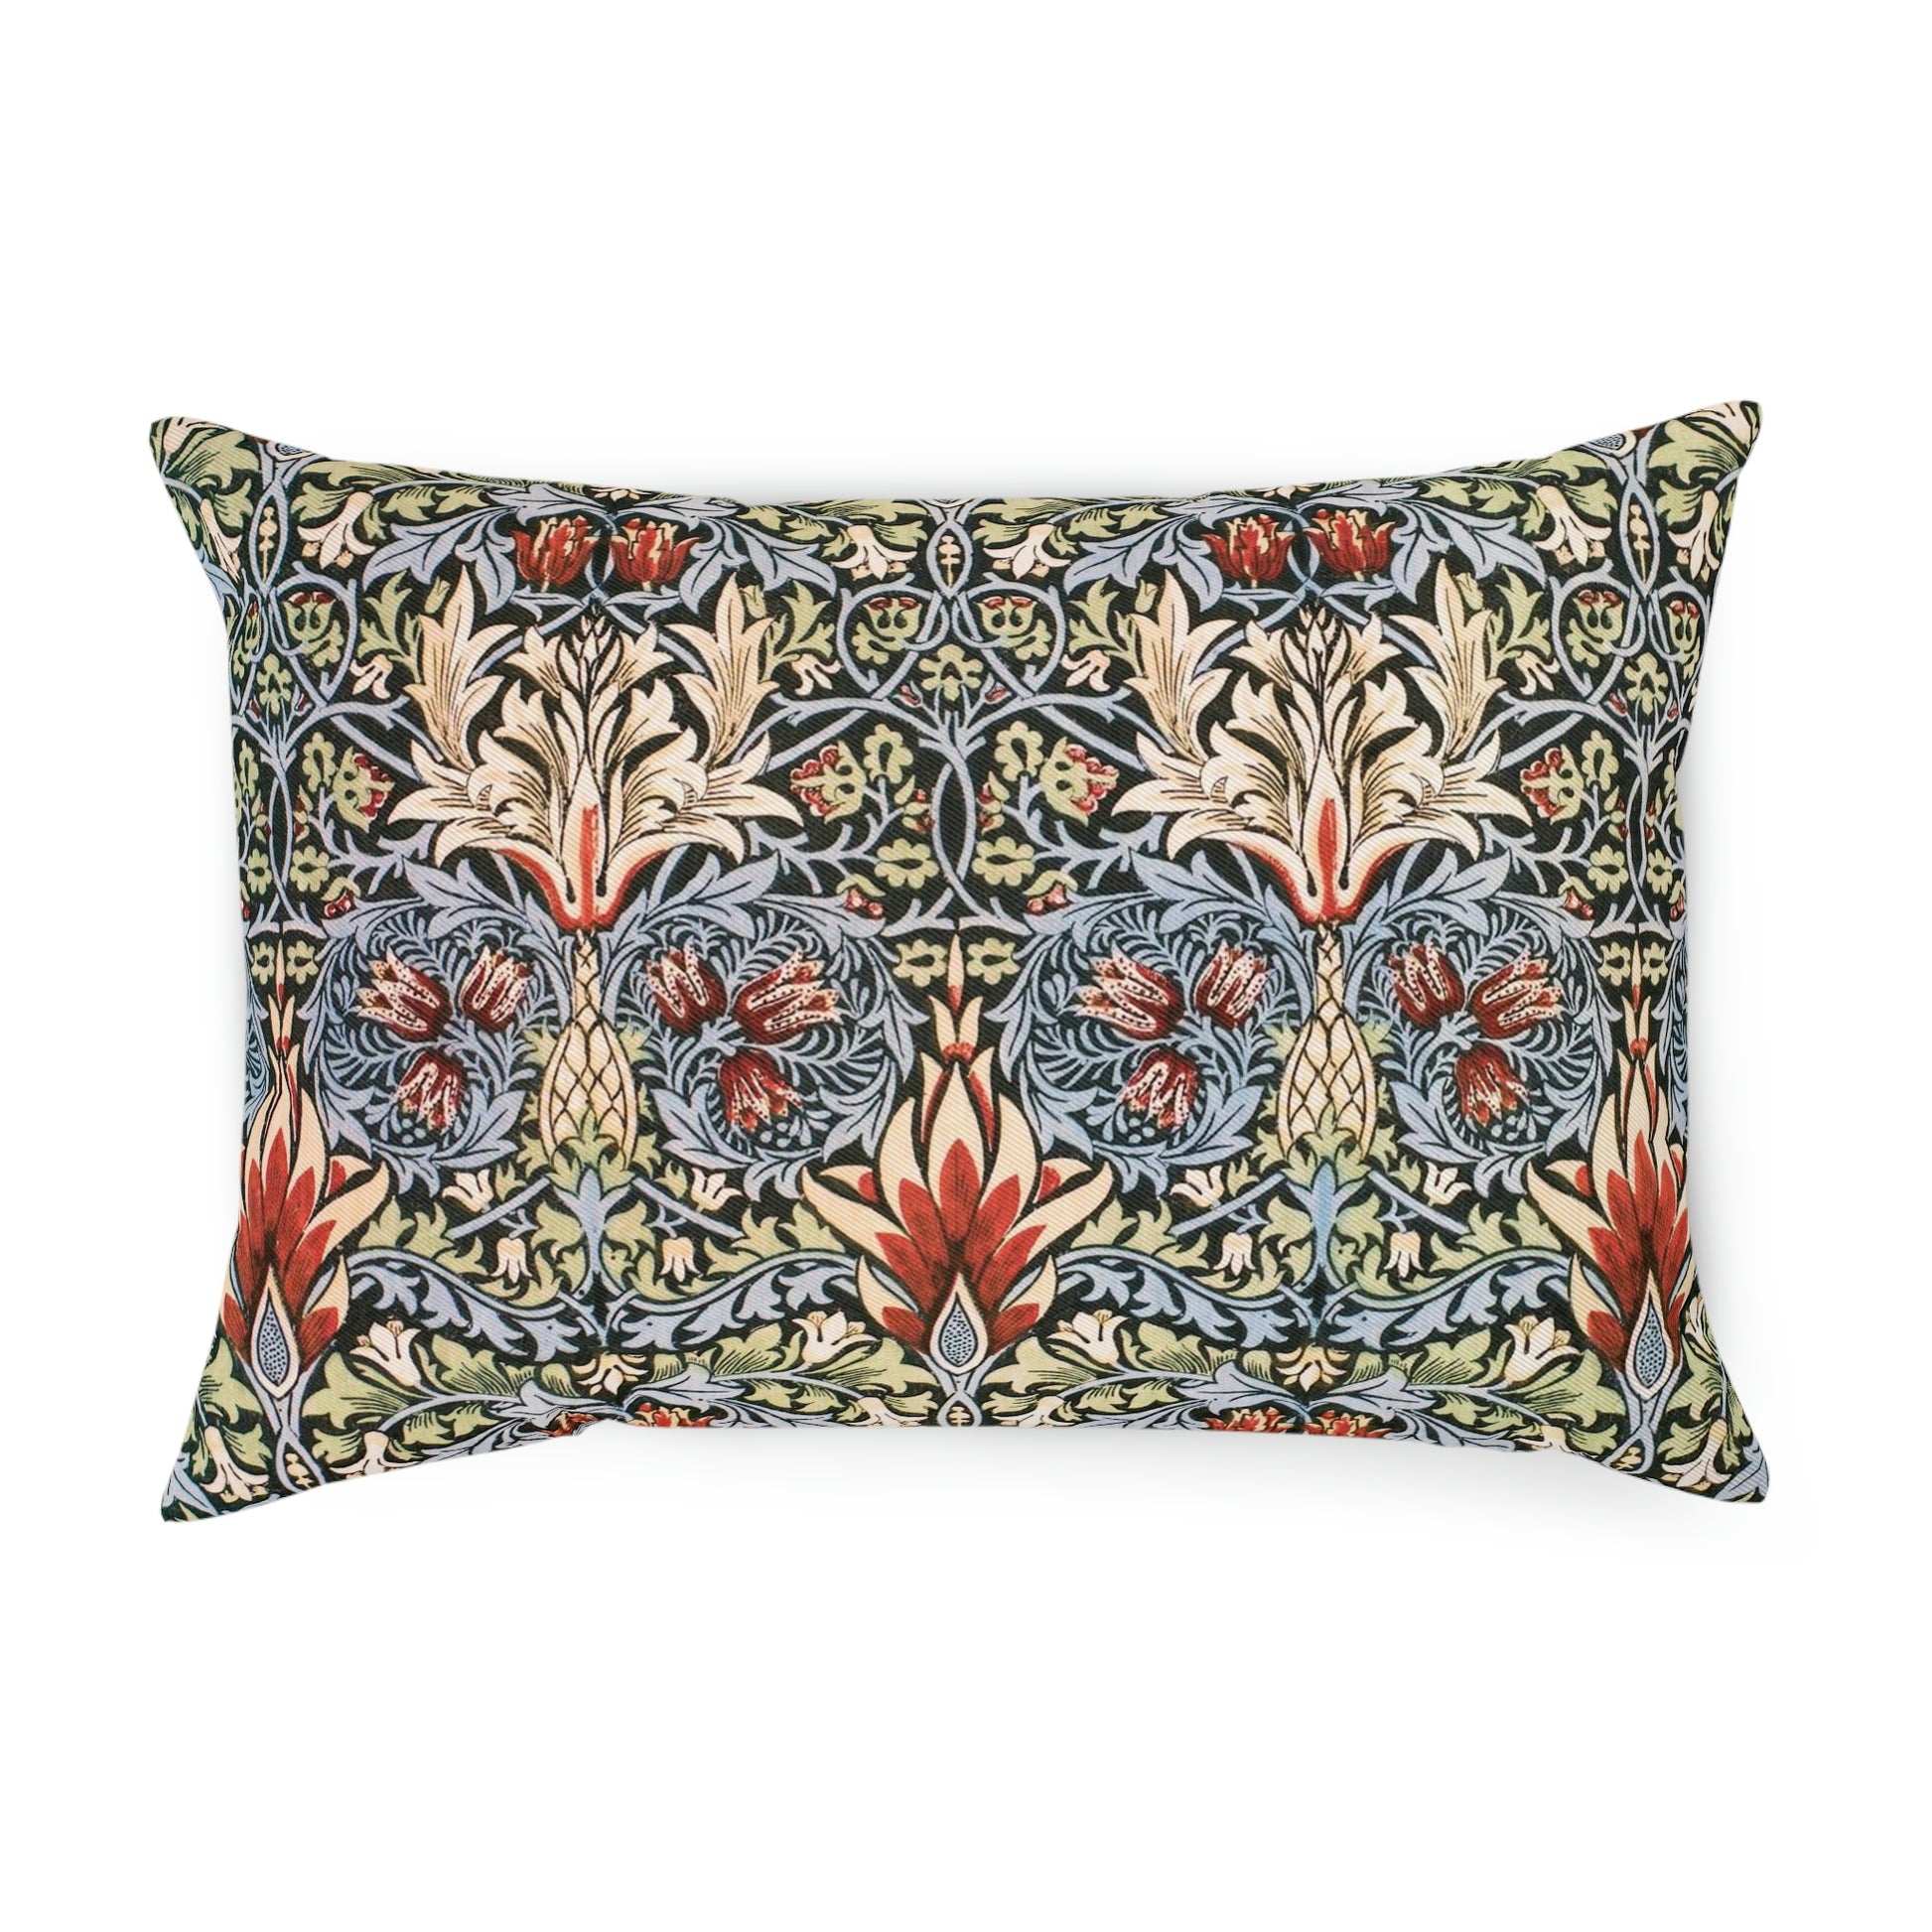 William-Morris-and-Co-Cushion-and-Cushion-Cover-Snakeshead-Collection-11